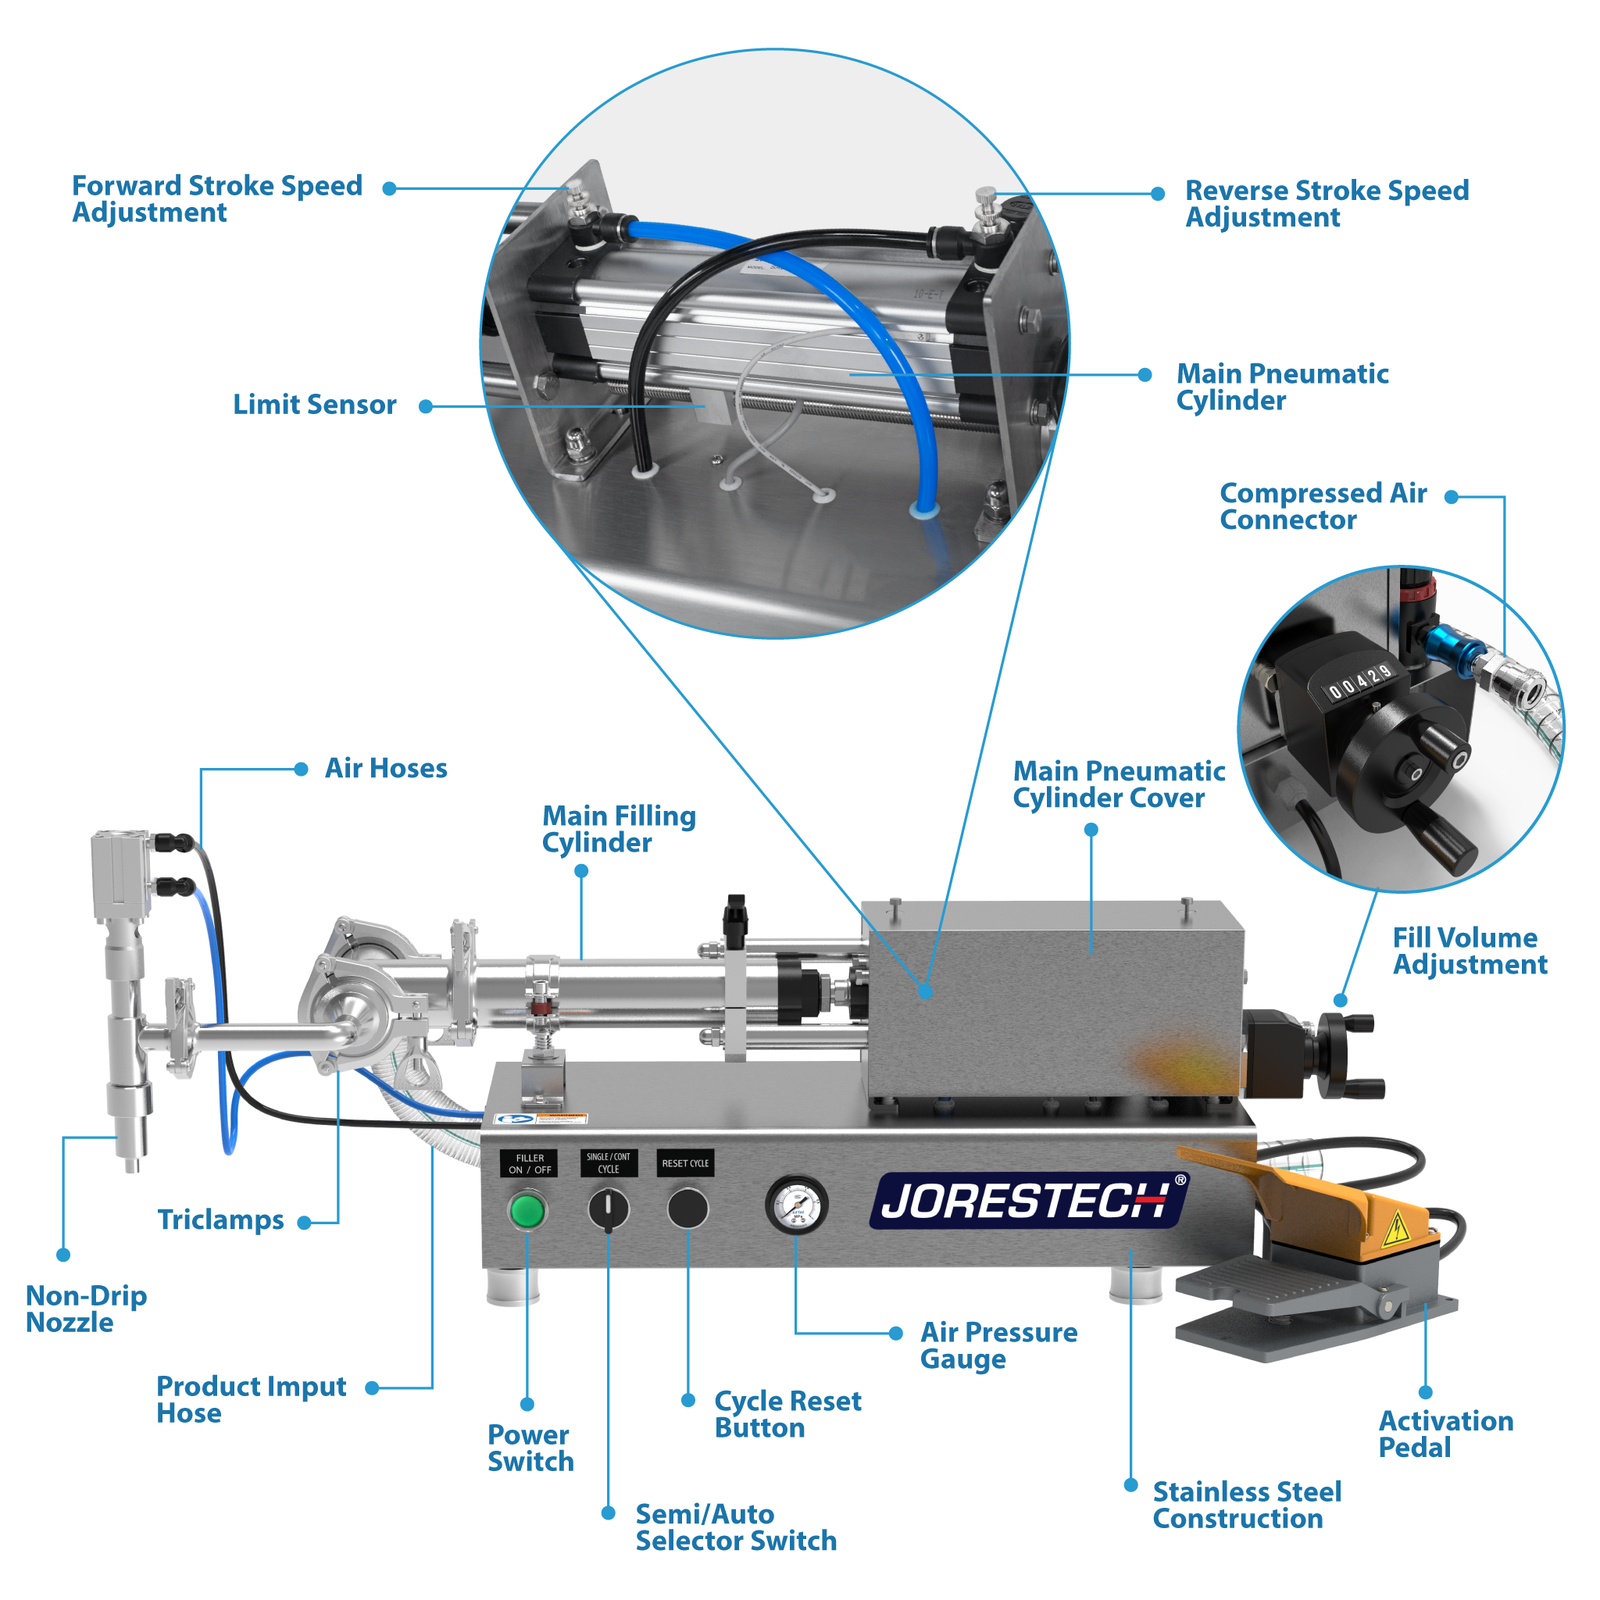 Low viscosity tabletop liquid piston filler. Call-outs are signaling the different parts of the machine in blue font. Two of the main parts mentioned are the Main Pneumatic Cylinder and the Fill Volume Adjuster